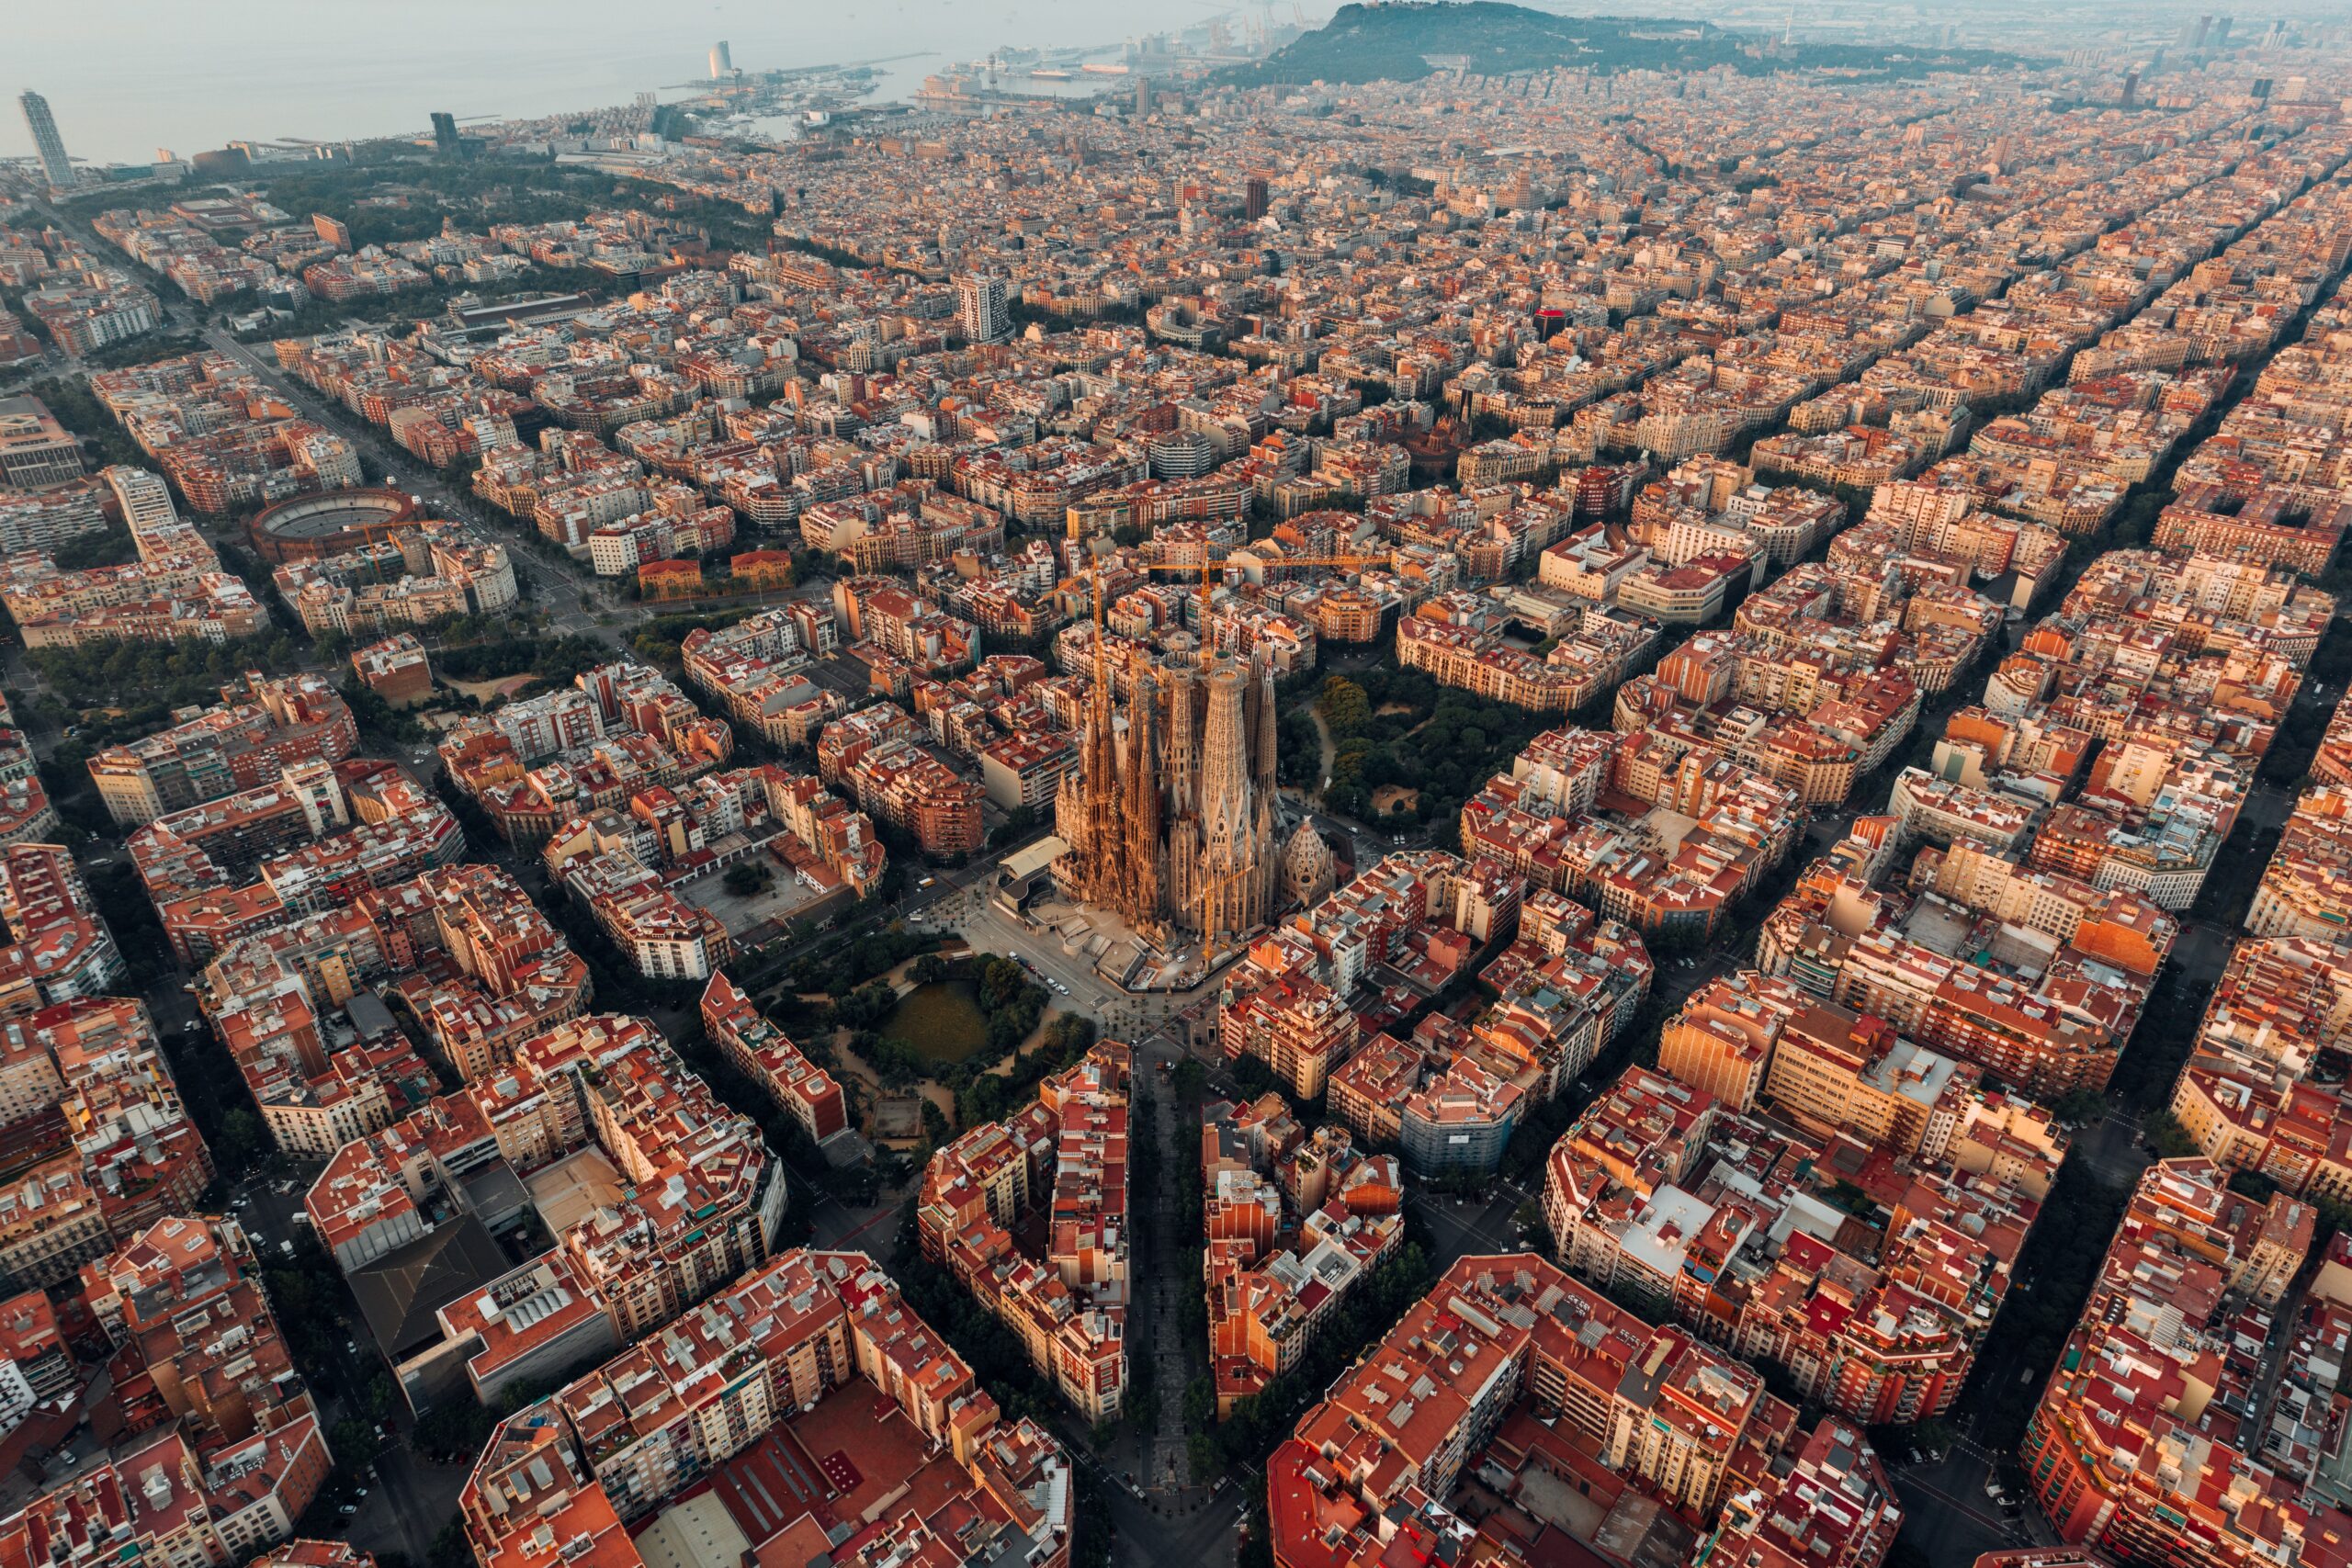 Barcelona: brimming with historic wonders